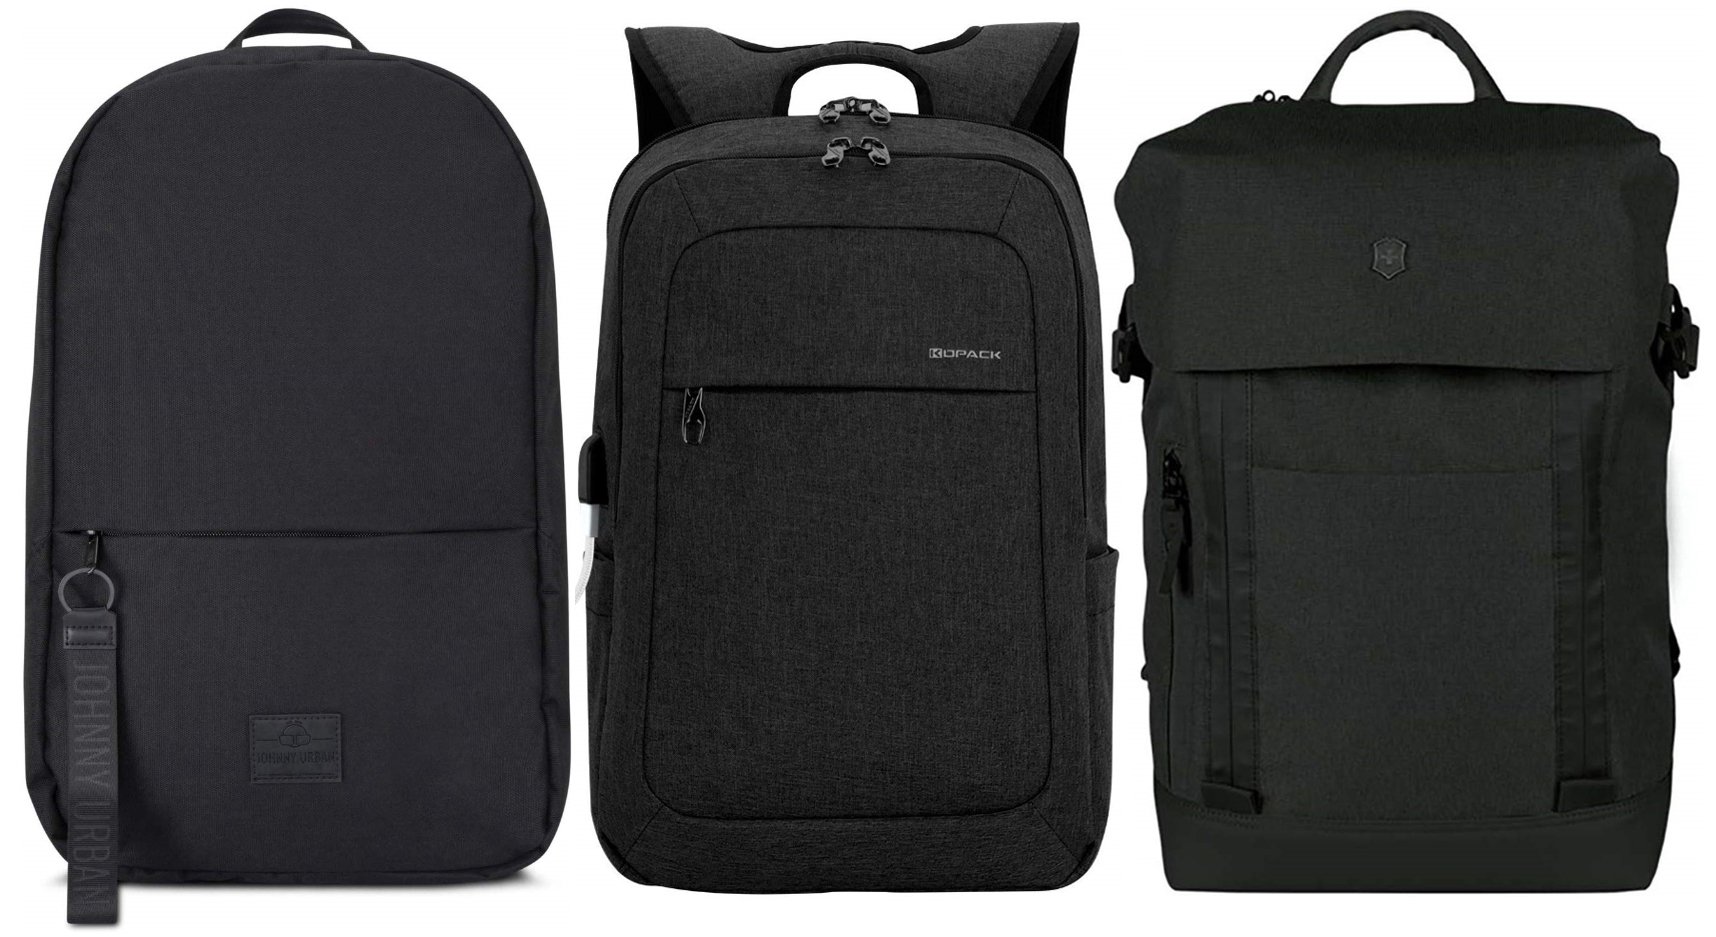 The Best Minimalist Laptop Backpacks Streamlined And Practical 2021